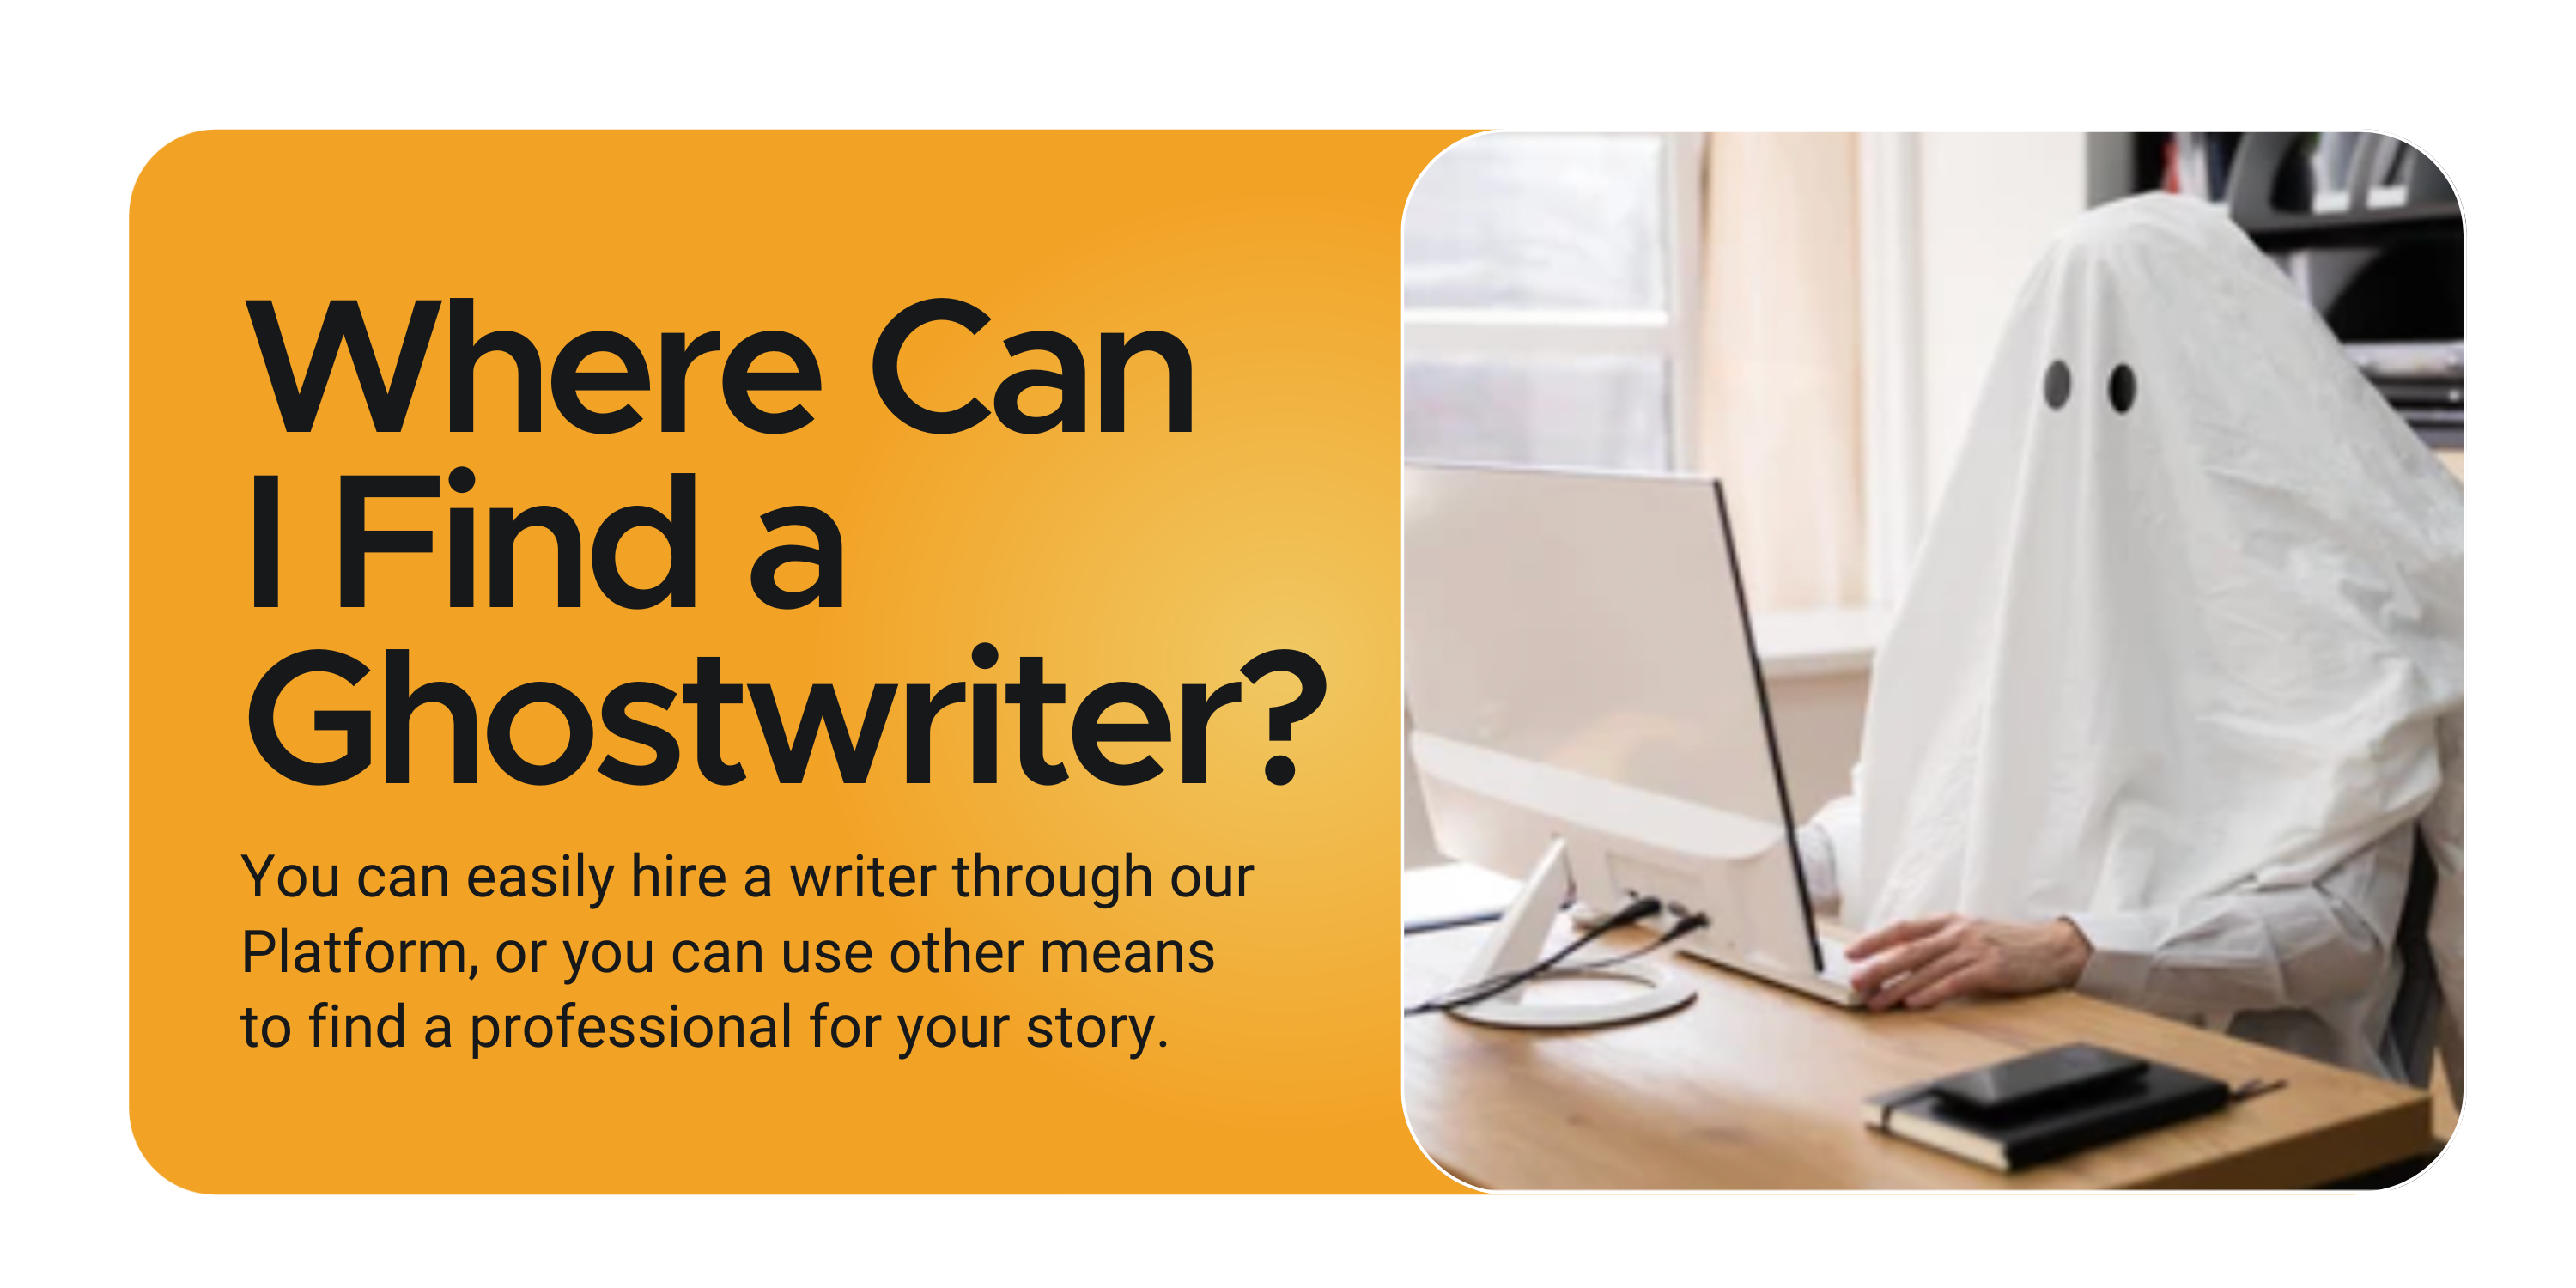 Get a ghostwriter - How to find a great ghostwriter